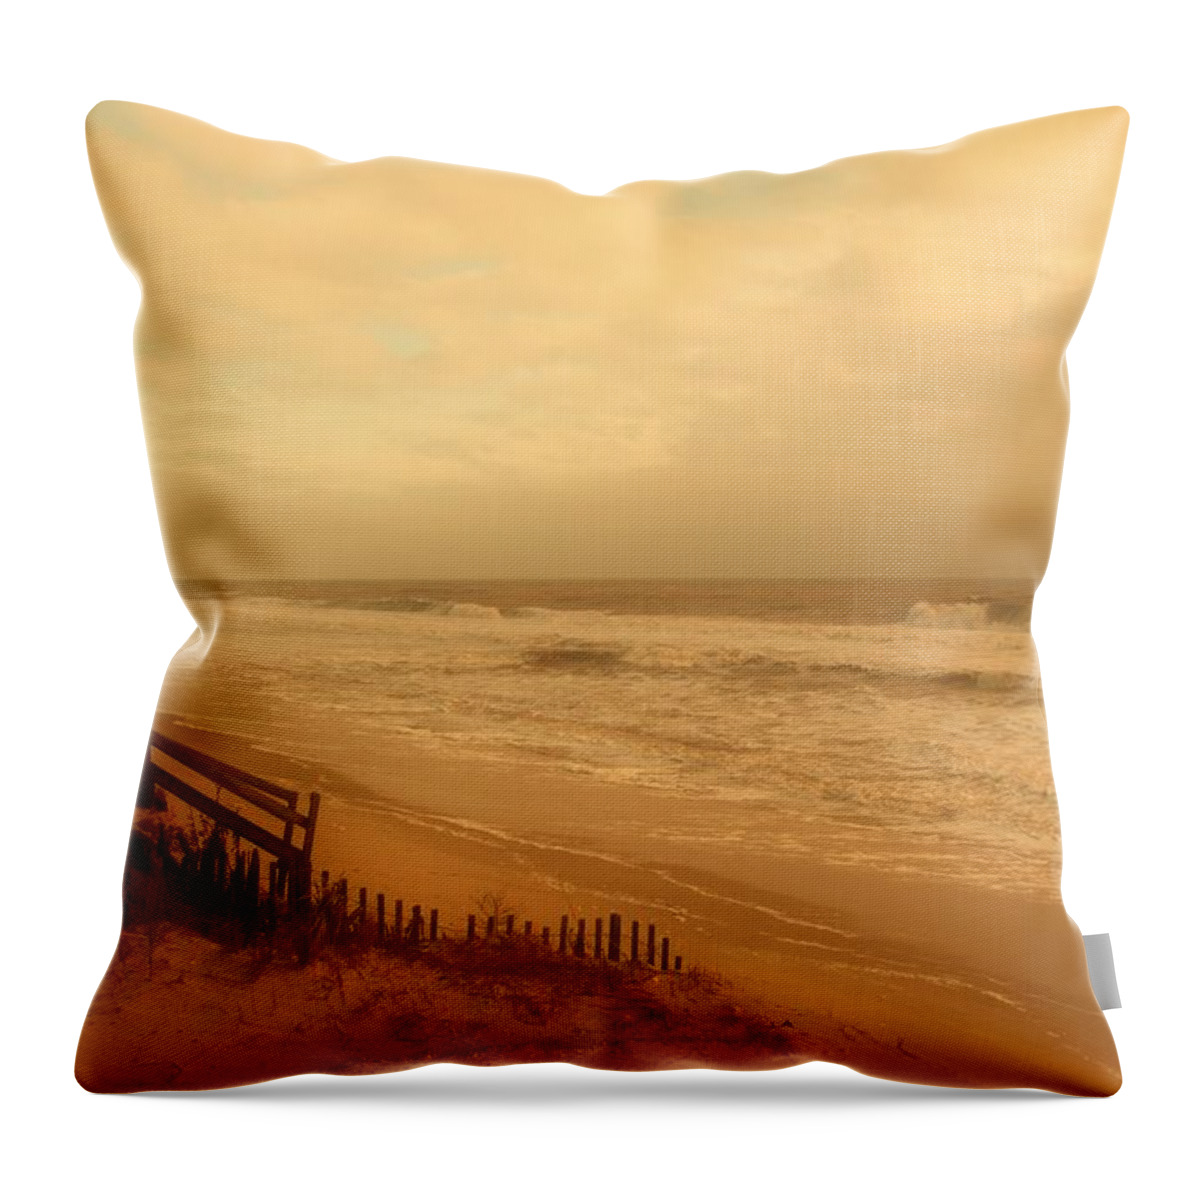 Jersey Shore Throw Pillow featuring the photograph In My Dreams The Ocean Sings - Jersey Shore by Angie Tirado